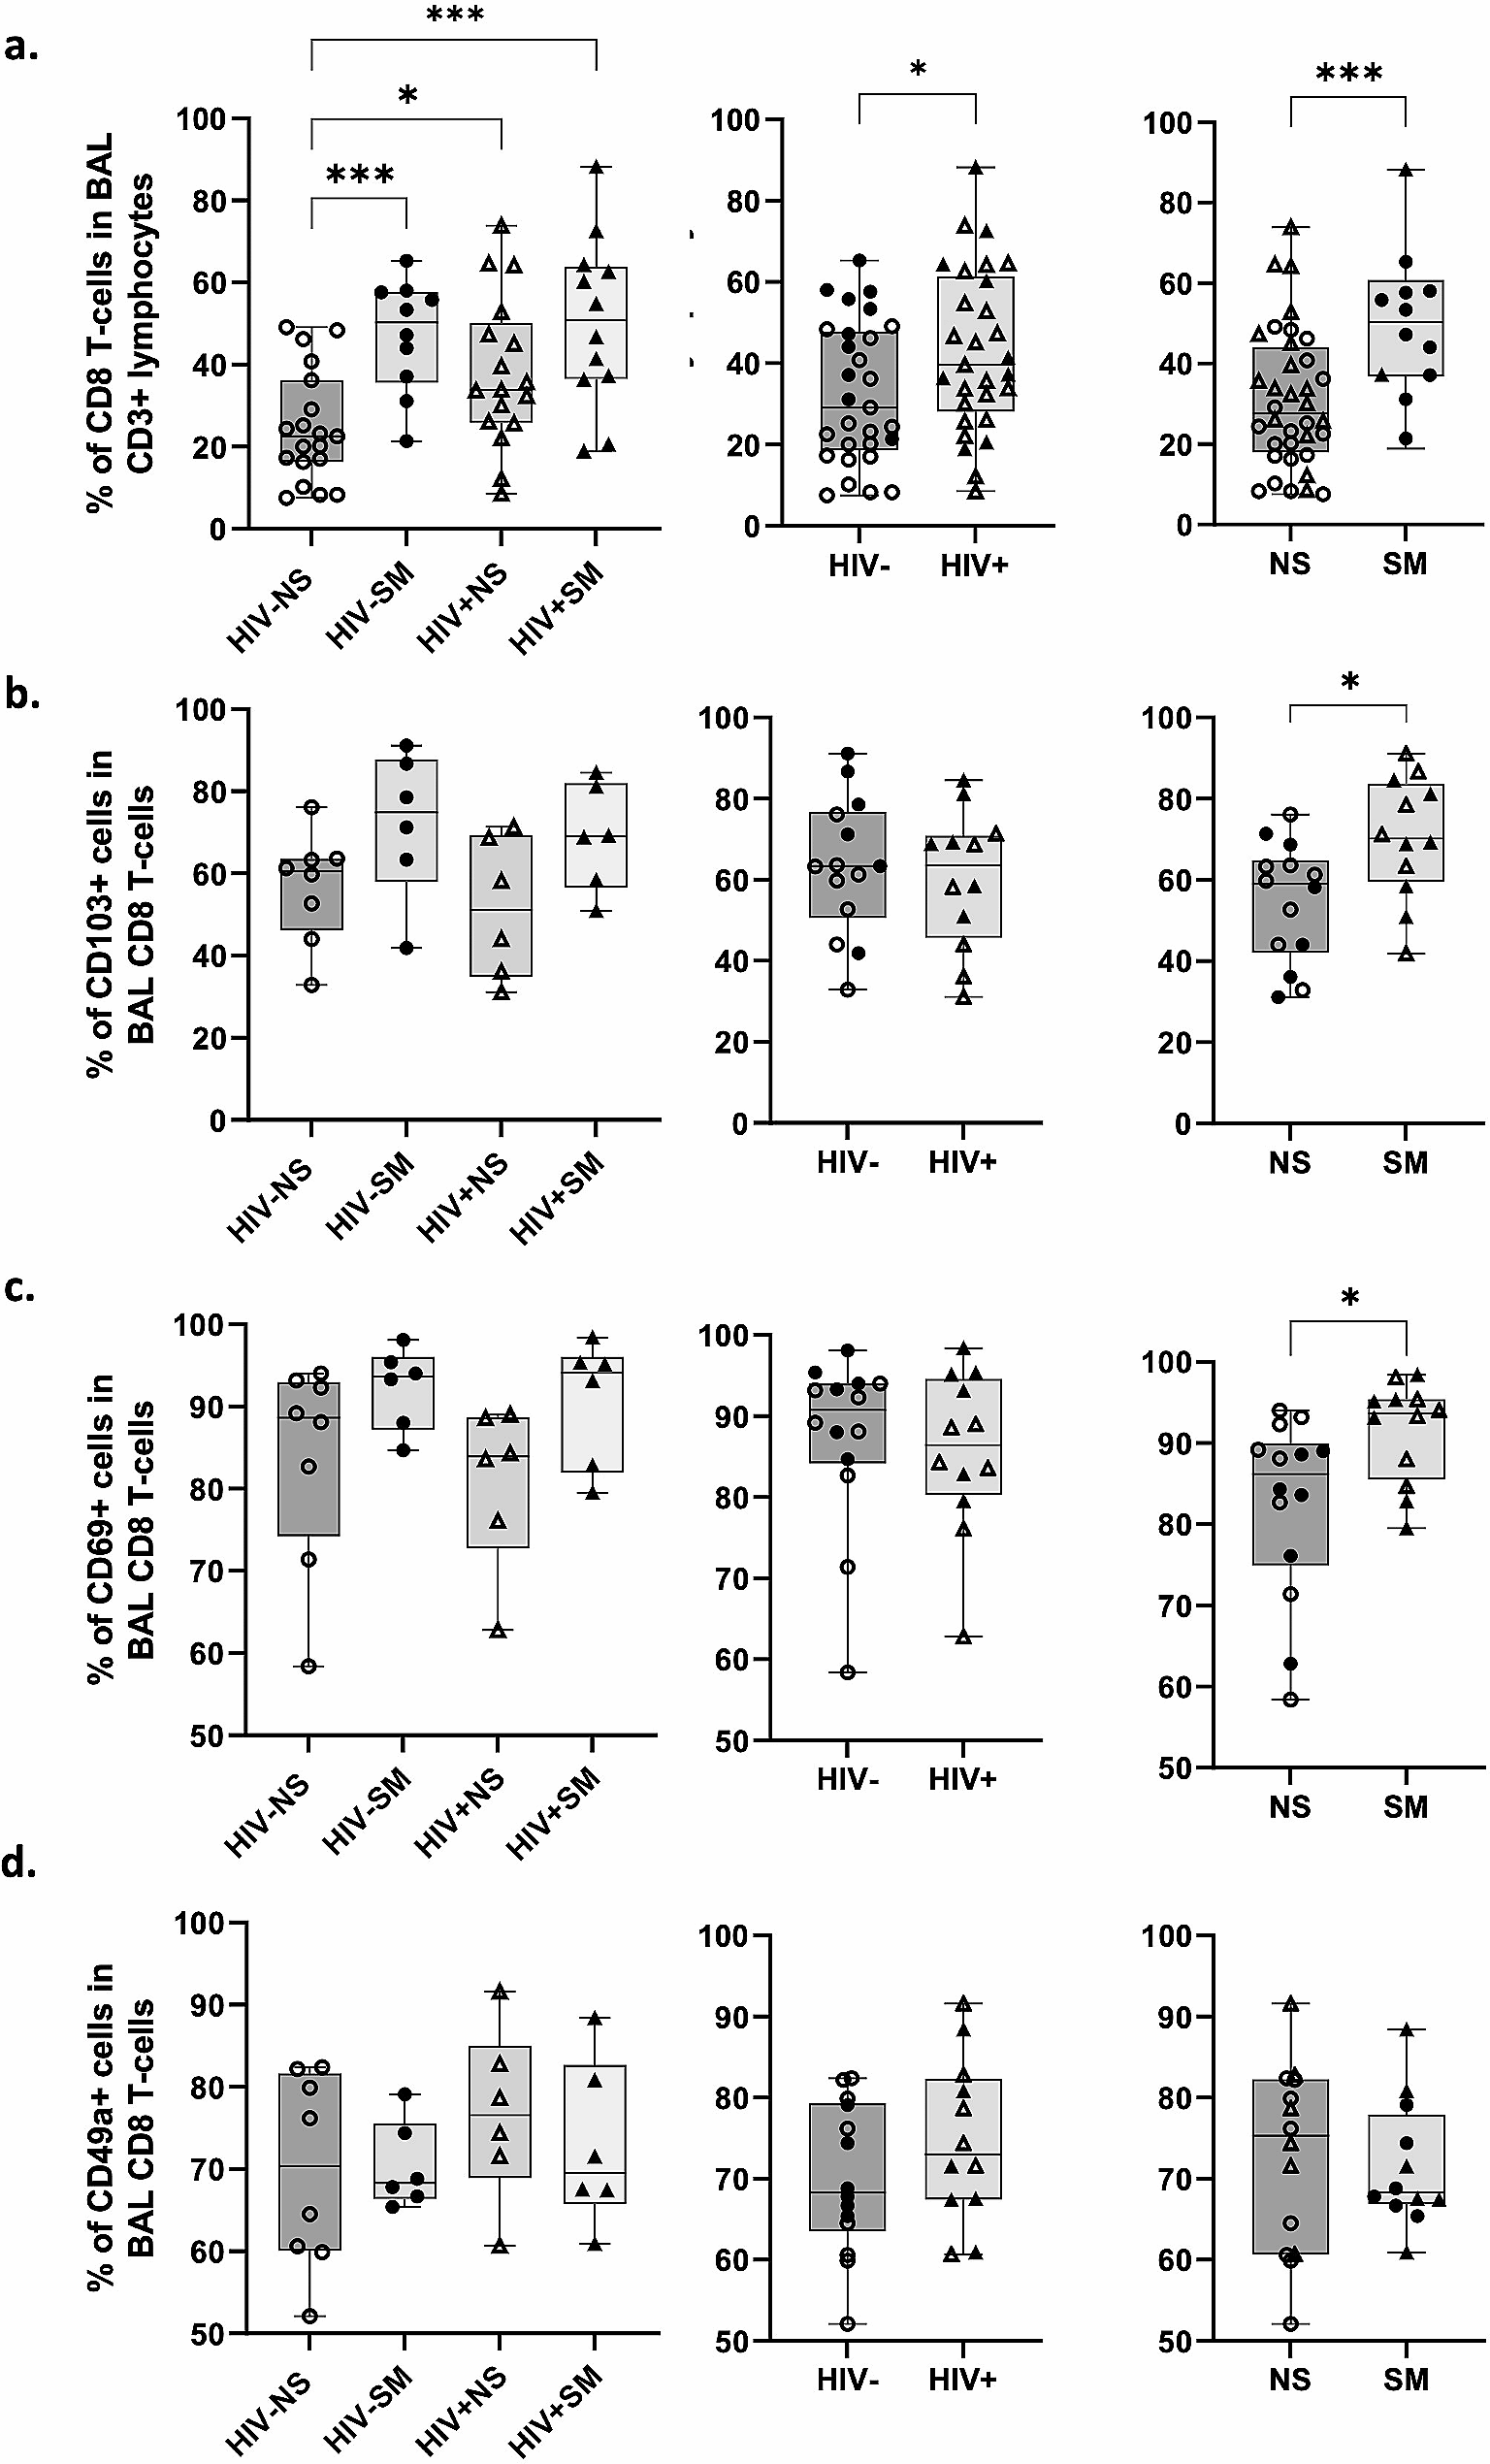 Dynamics of pulmonary mucosal cytotoxic CD8 T-cells in people living with HIV under suppressive antiretroviral therapy